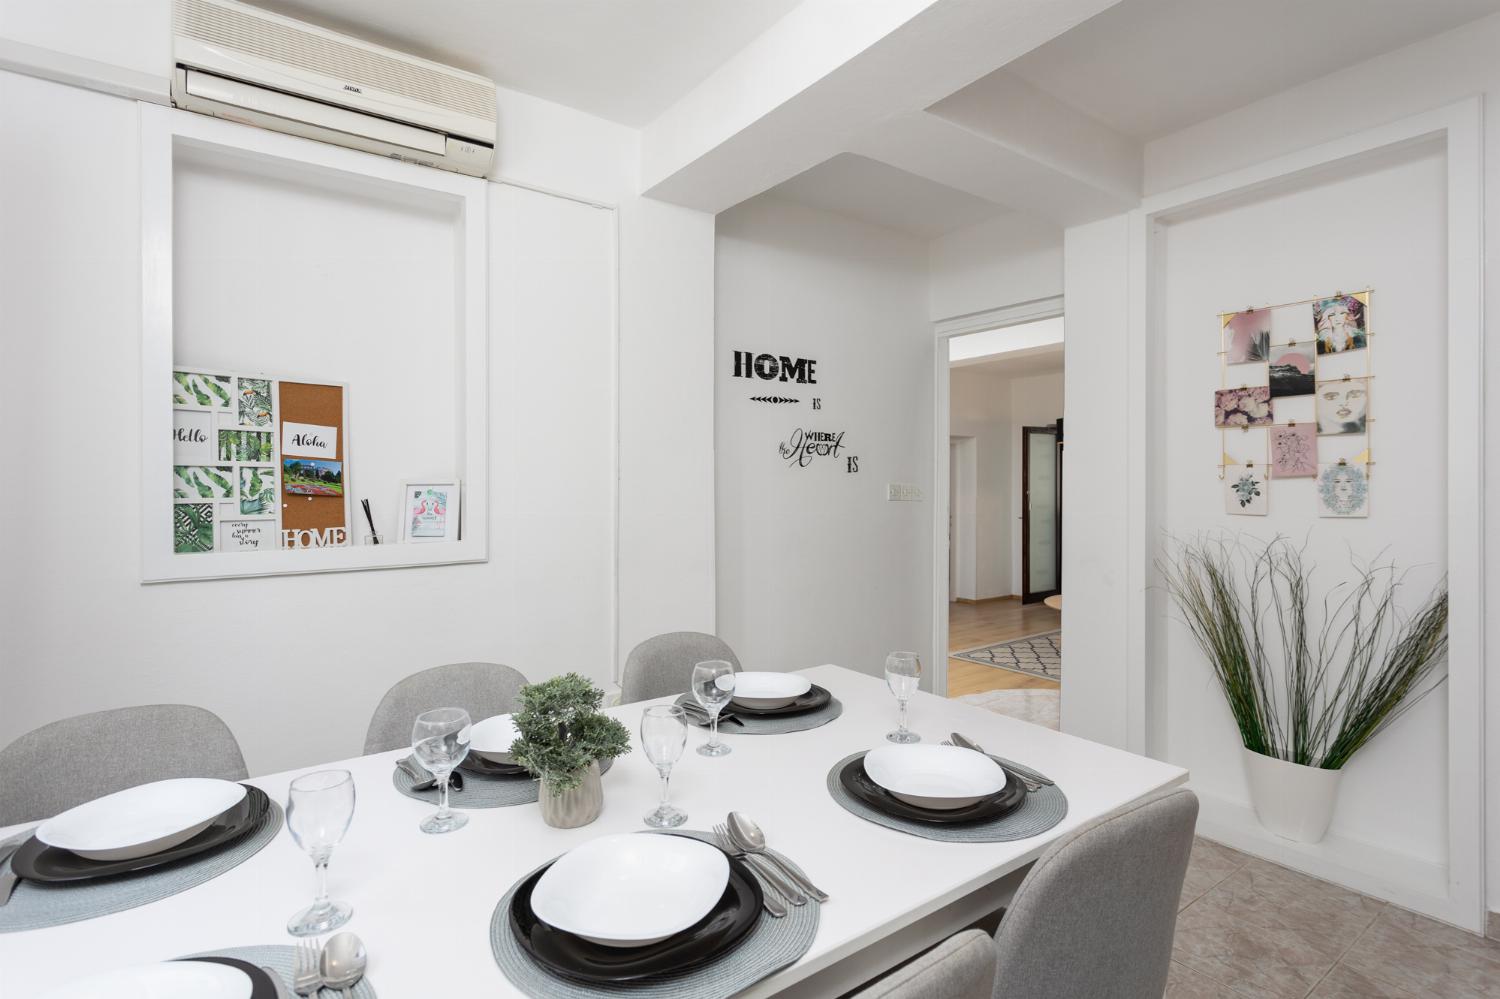 Ground floor: dining room with A/C